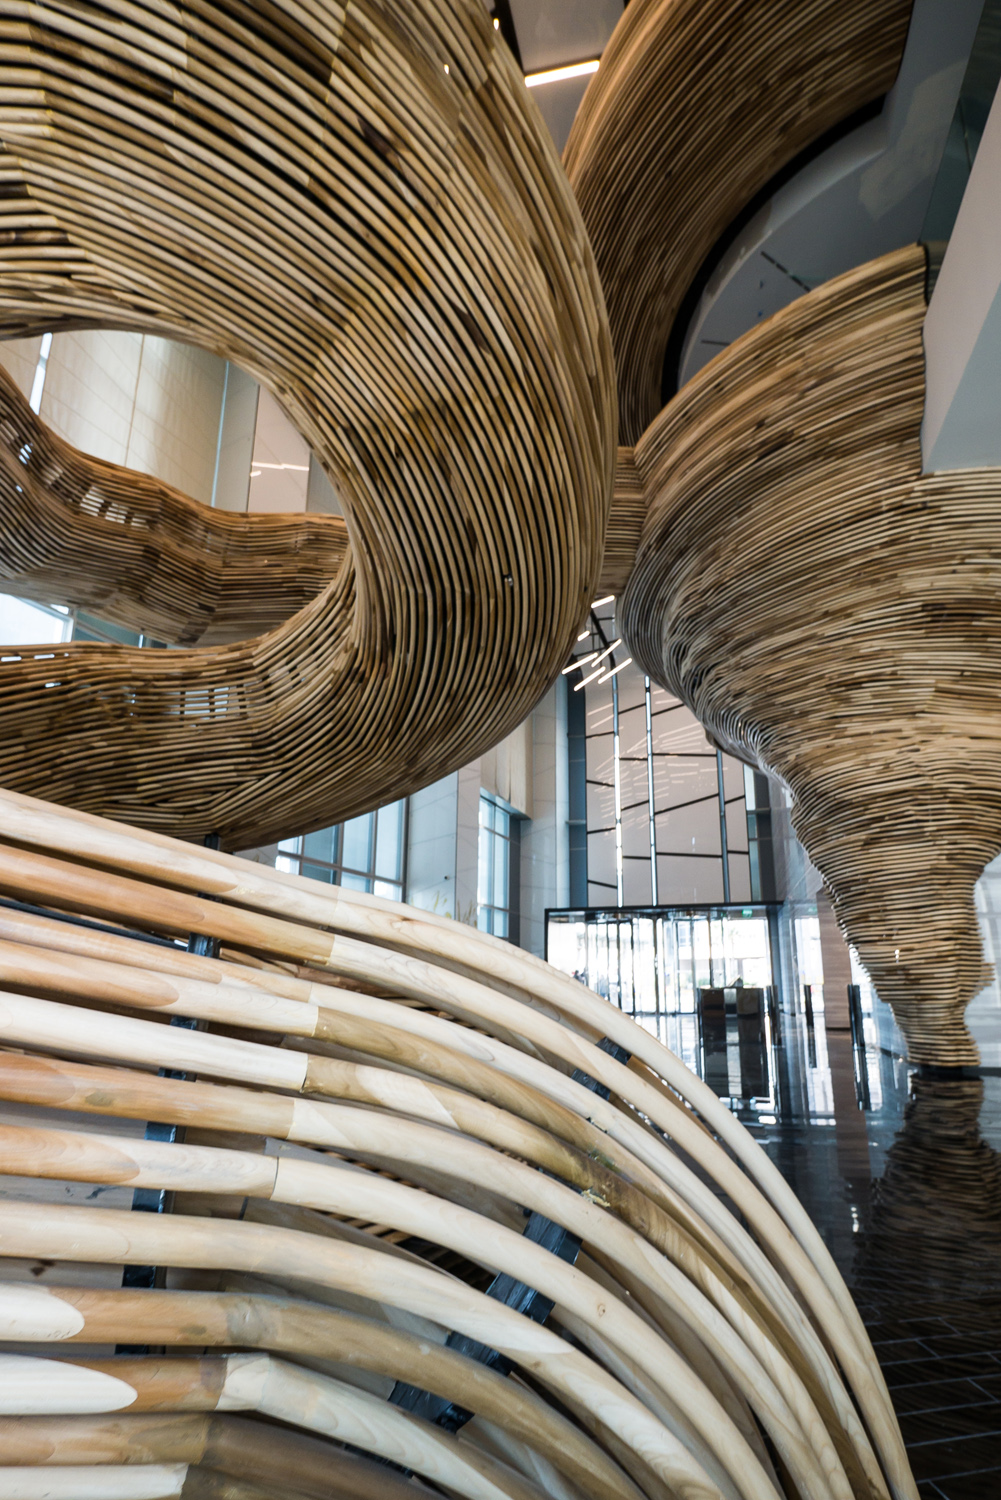 Though the structure may seem flexible and bendable, it is incredibly stiff and stable, combining algorithmic data processing and masterful craftsmanship, creating an organically-inspired, artistic result.